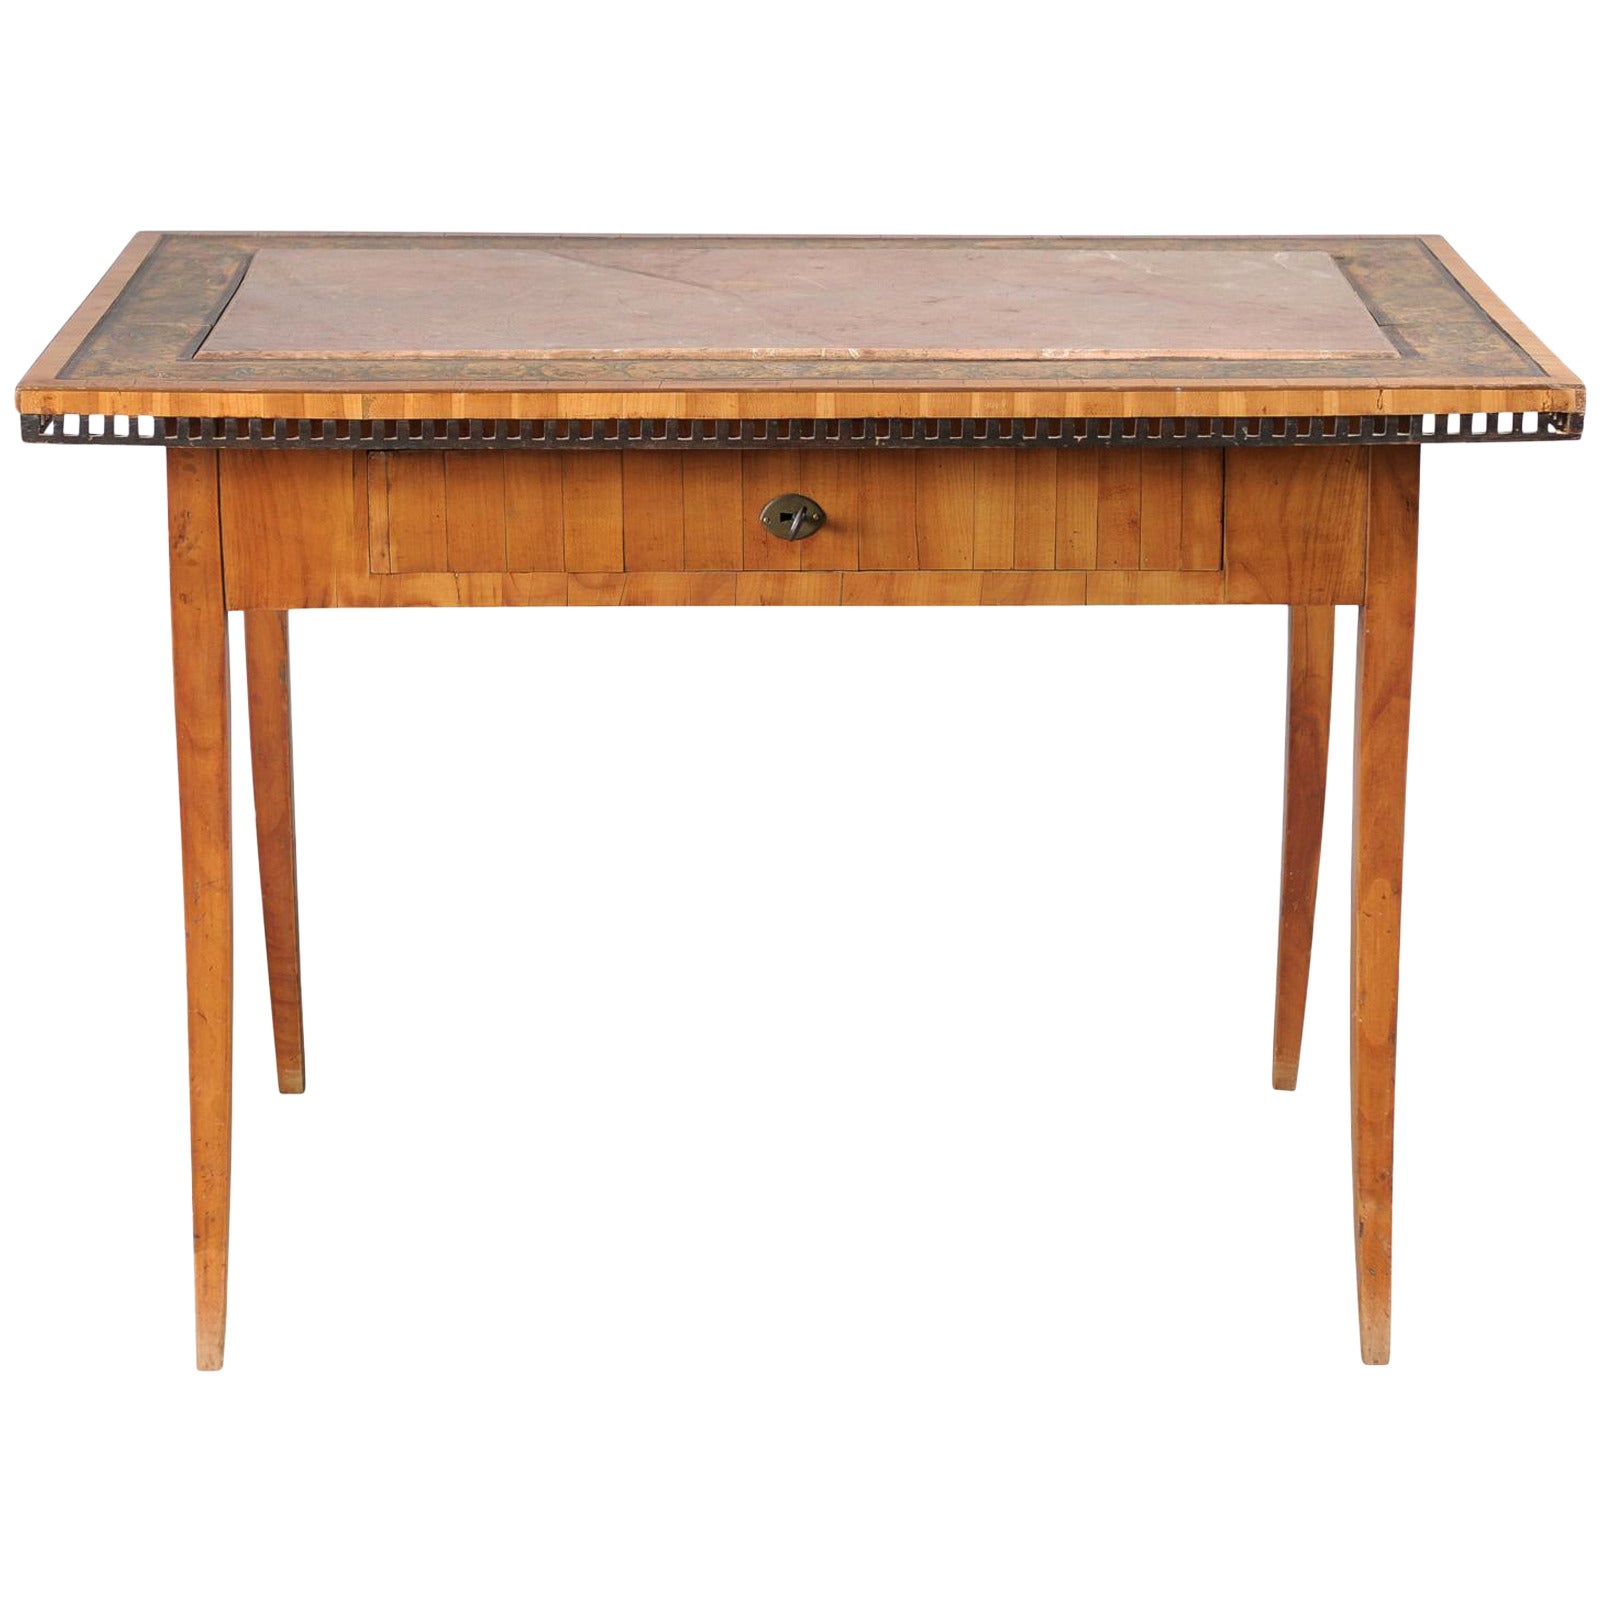 Austrian Table/Writing Desk with Inset Stone Top and Painted Border, circa 1810